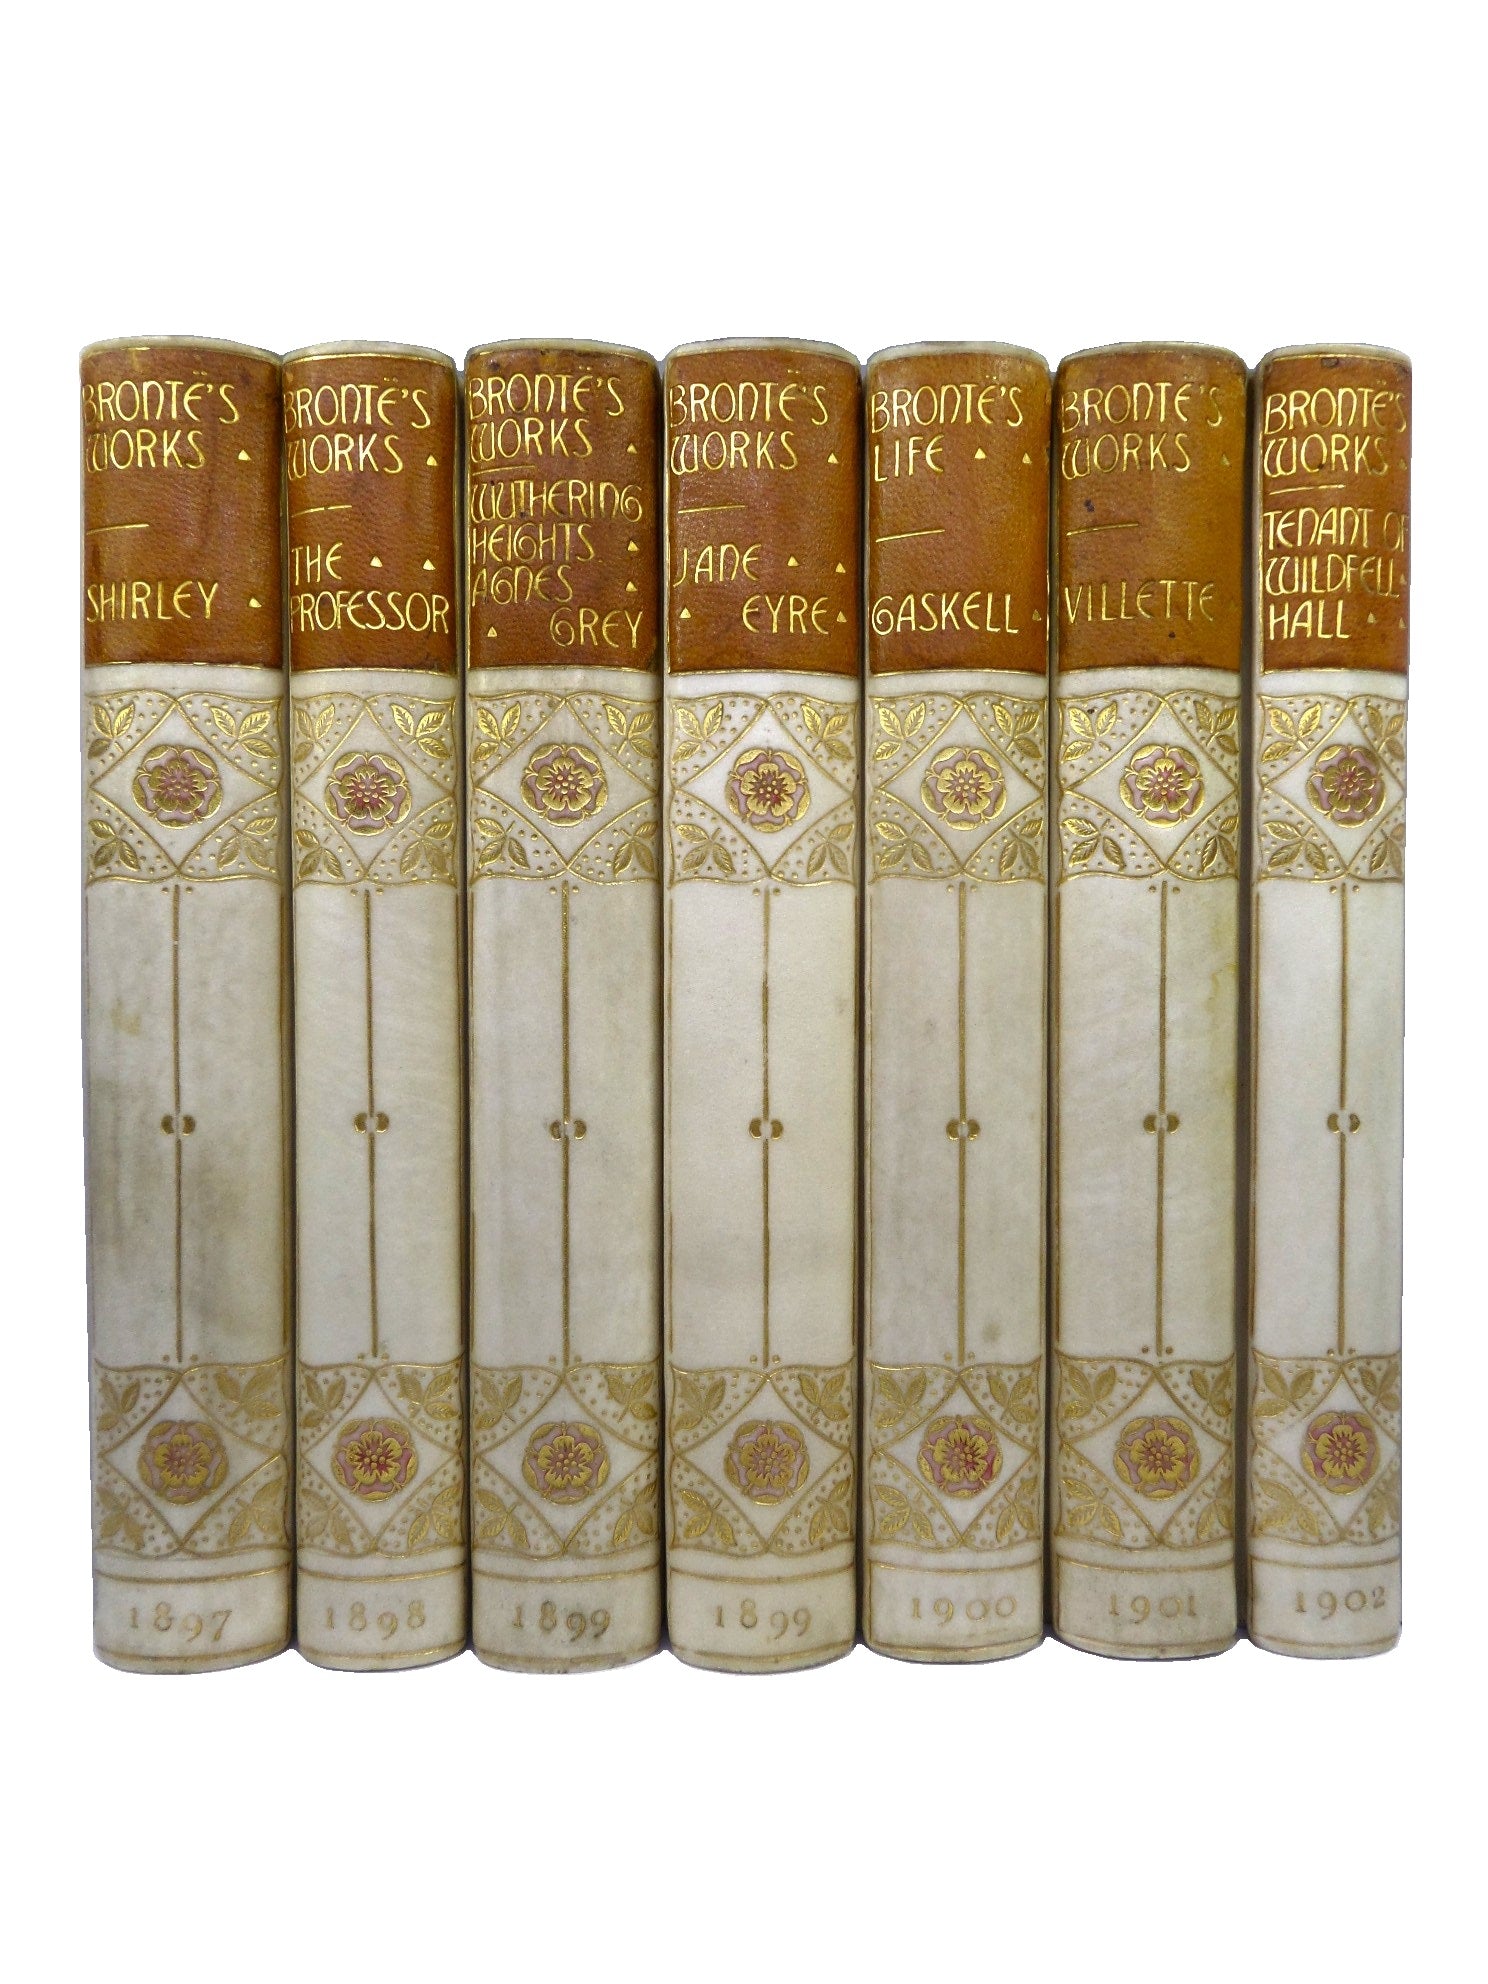 LIFE & WORKS OF CHARLOTTE BRONTE & HER SISTERS FINELY BOUND IN SEVEN VOLUMES BY TRUSLOVE & HANSON